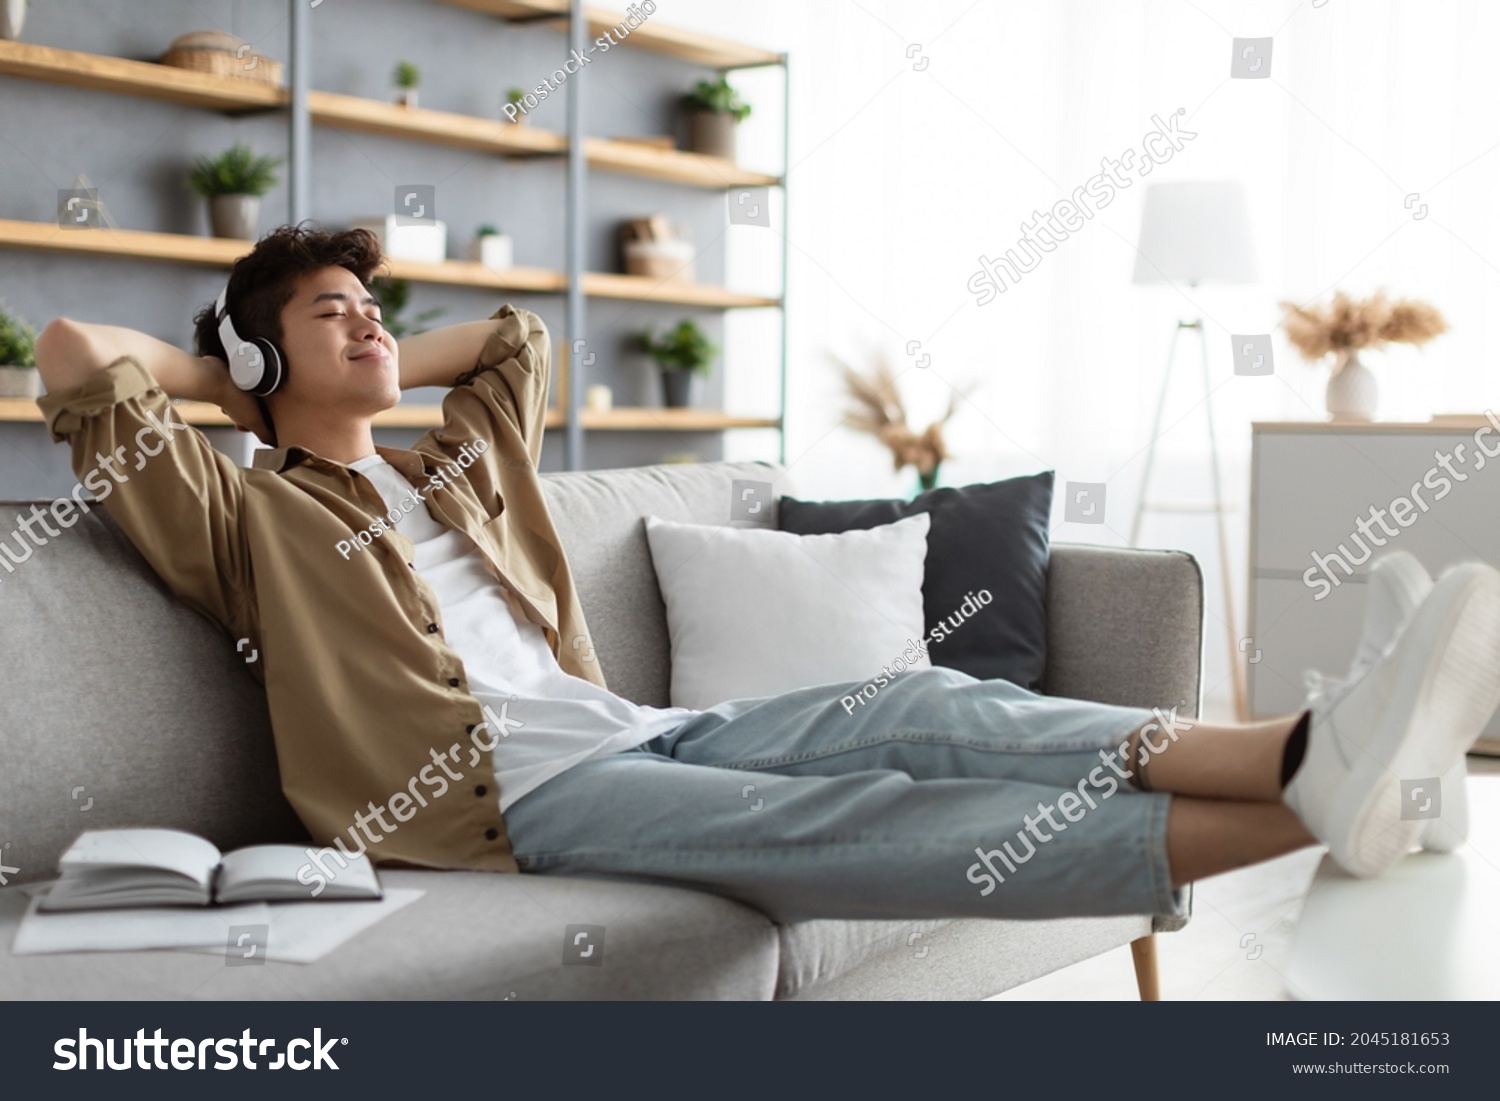 Rest And Relax Concept. Calm asian man sitting on couch, listening to music, audio book, podcast, enjoying meditation for sleep and peaceful mind in wireless headphones, leaning back, copy space #2045181653